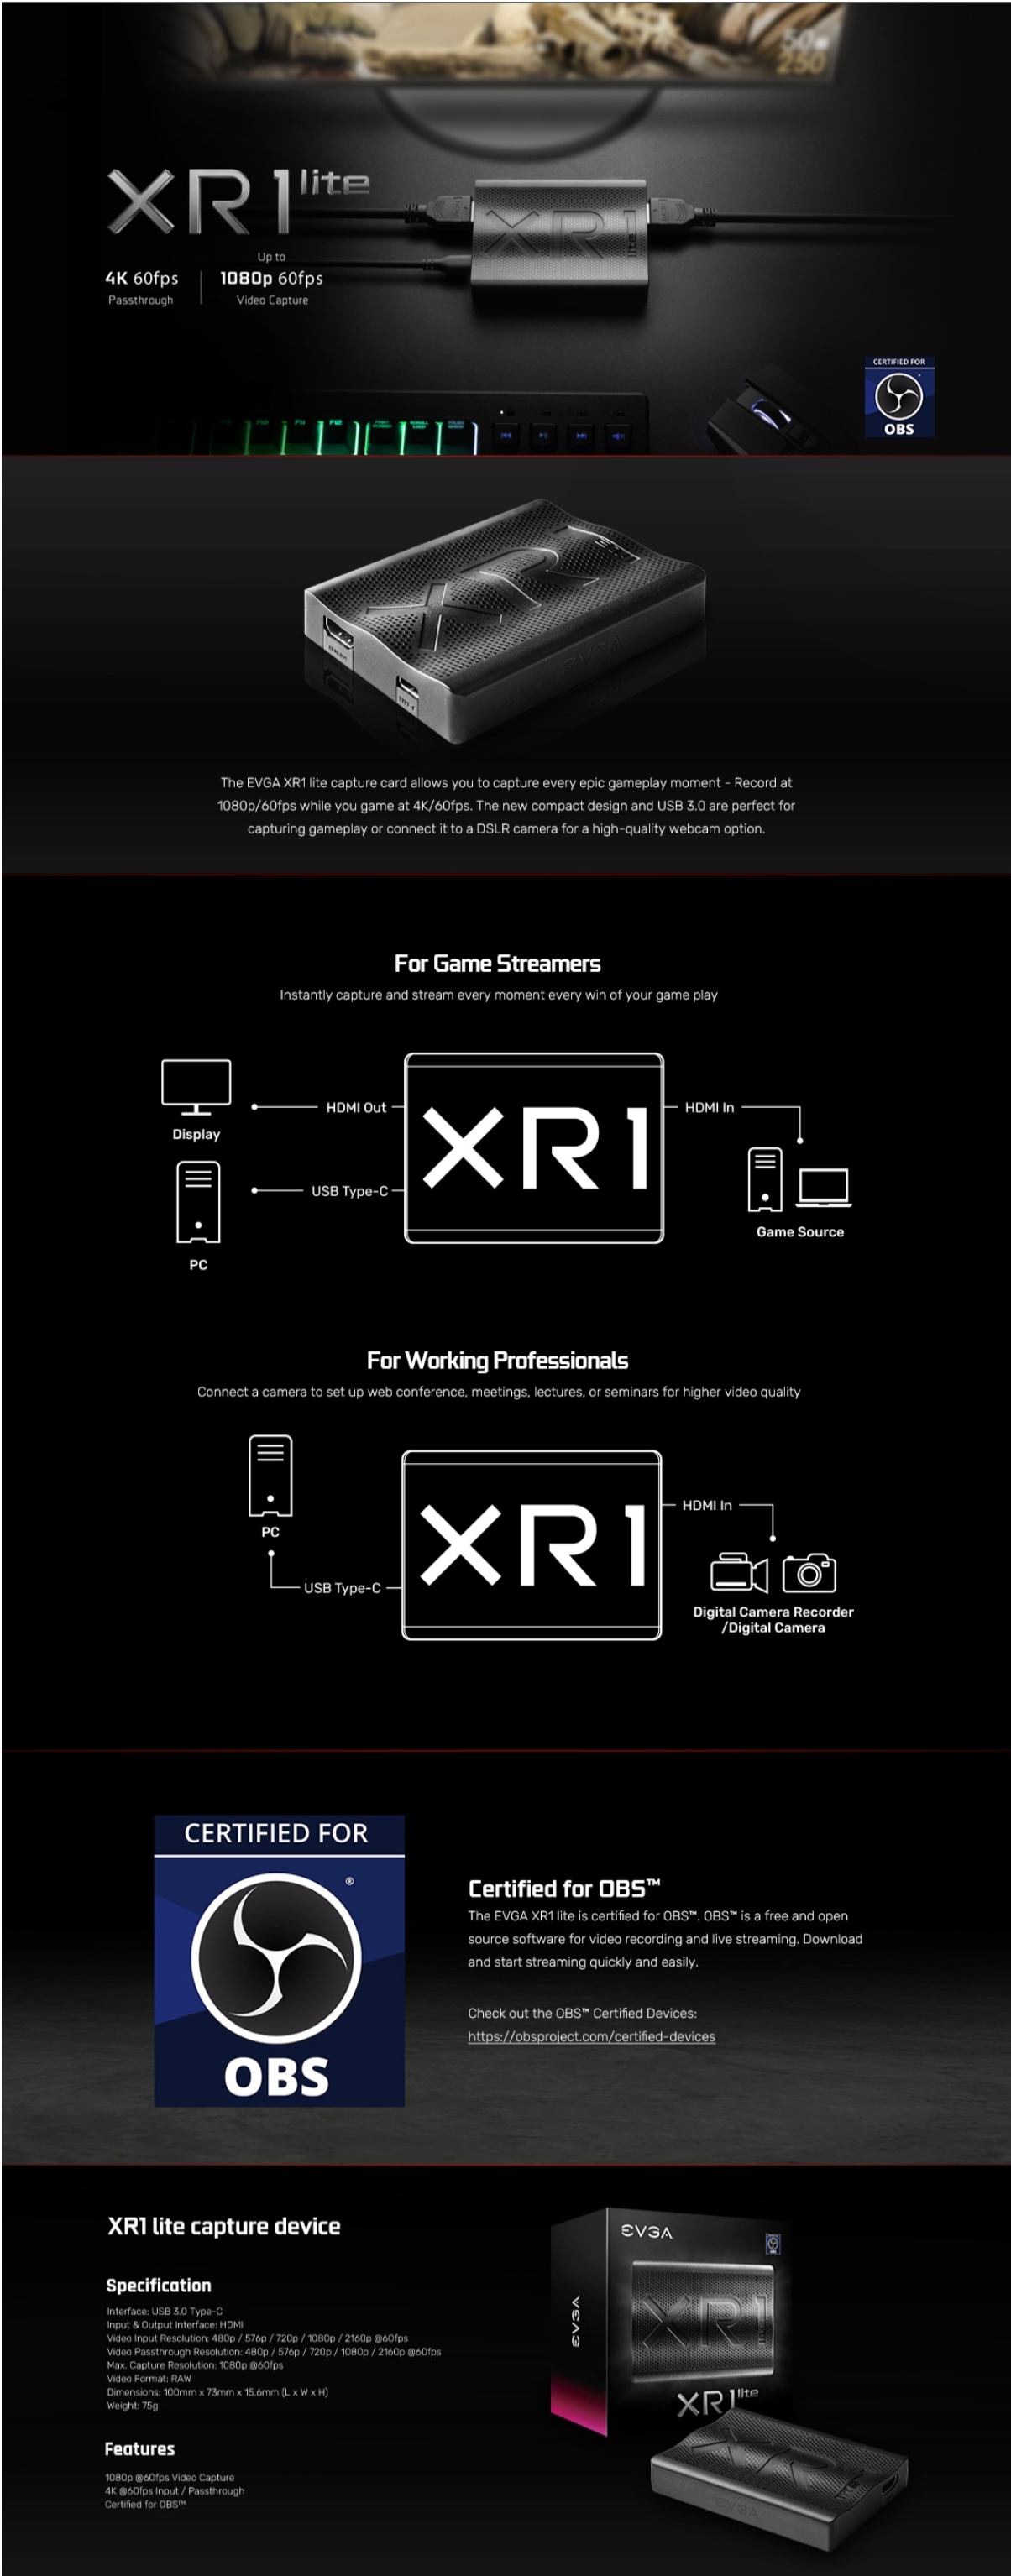 A large marketing image providing additional information about the product eVGA XR1 Lite Full HD Capture Box - Additional alt info not provided